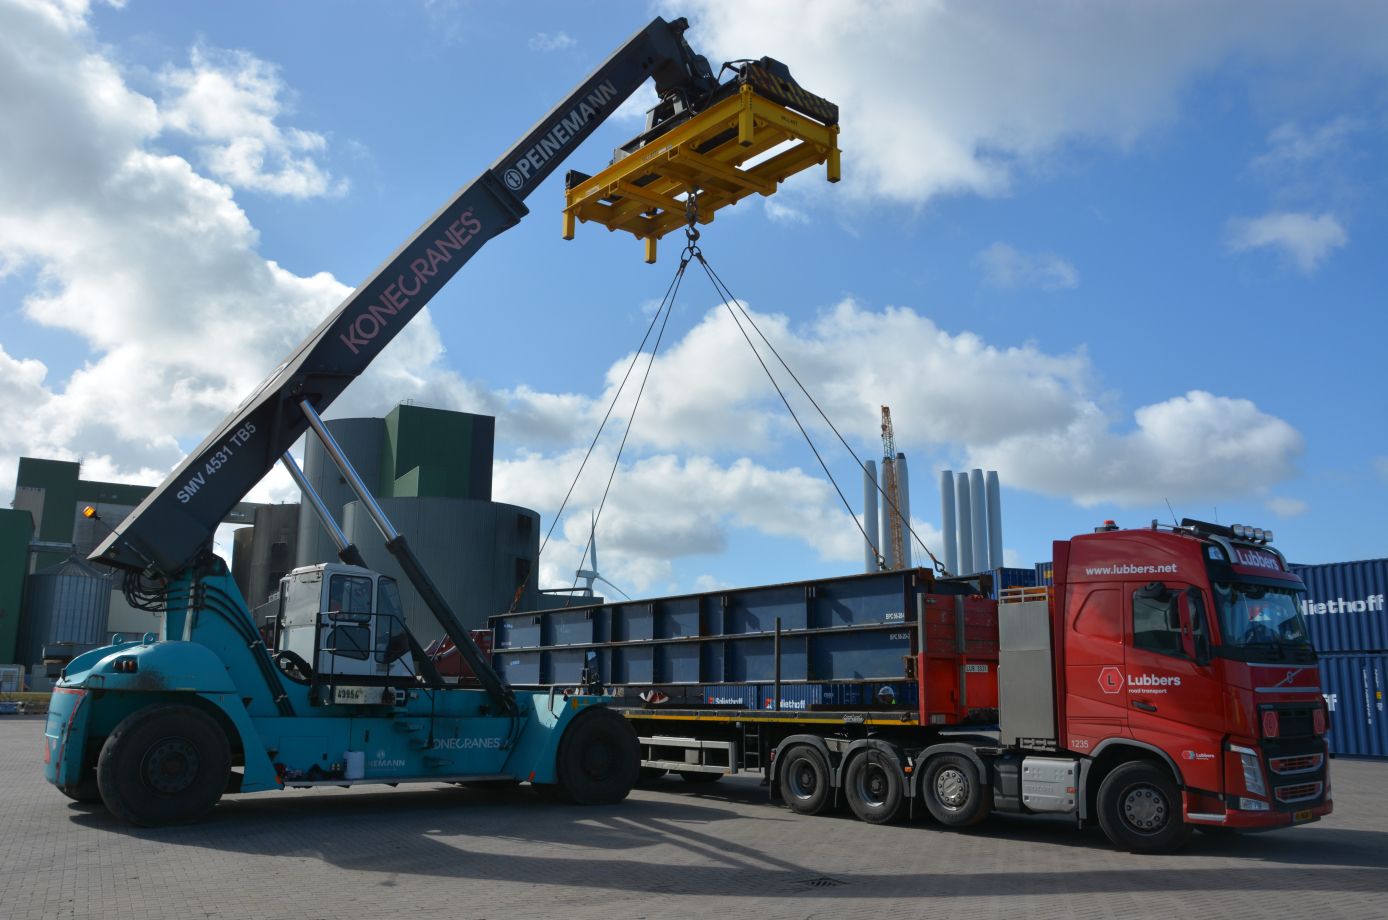 Lubbers moves well service equipment from Israel to Emmen